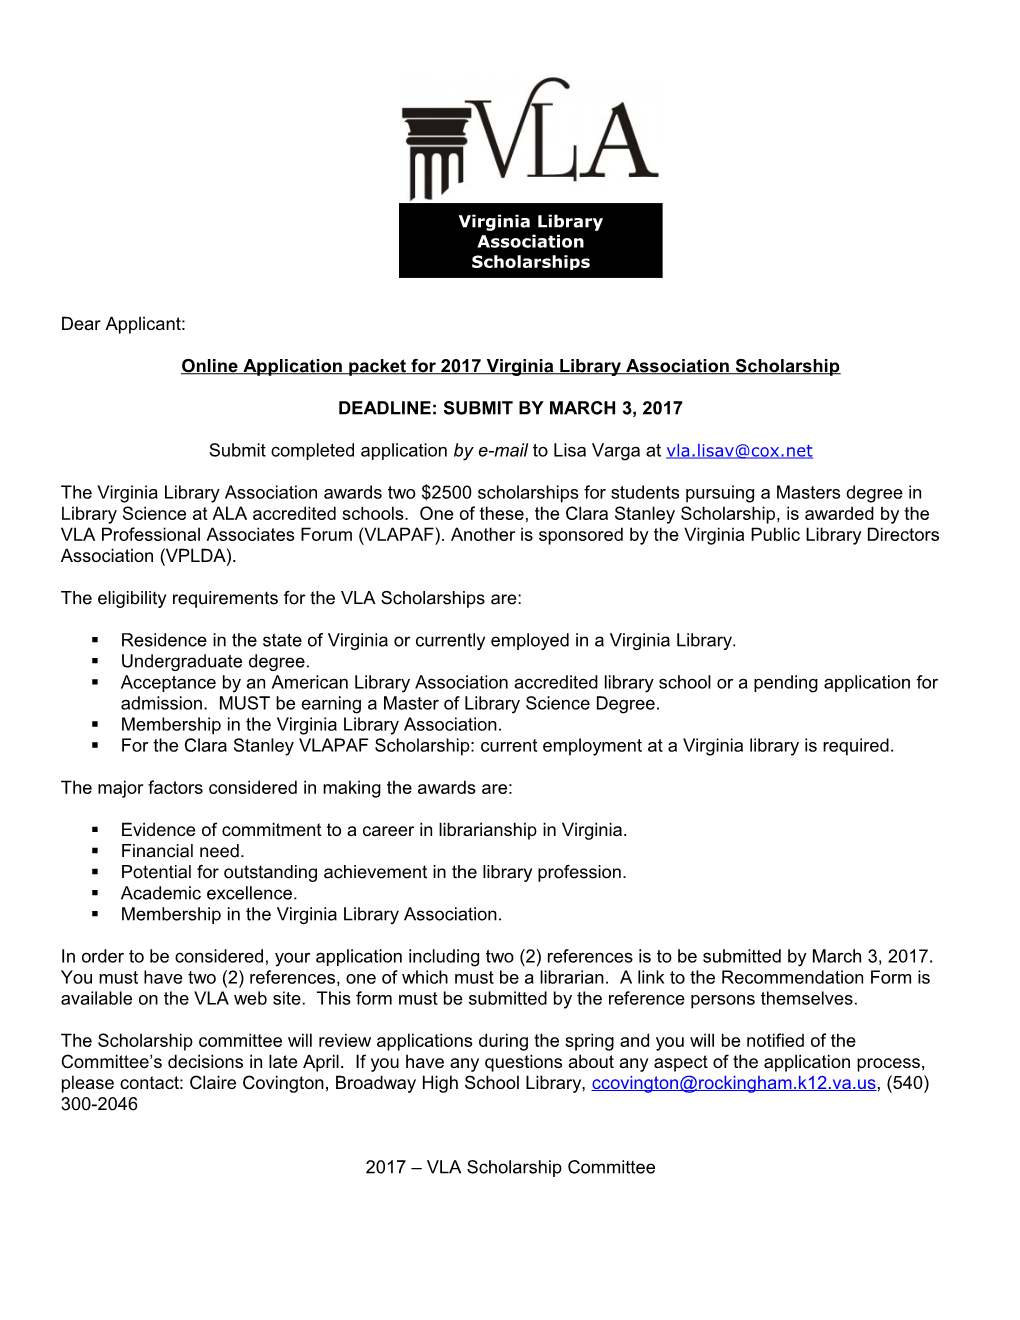 Online Application Packet for 2017 Virginia Library Association Scholarship